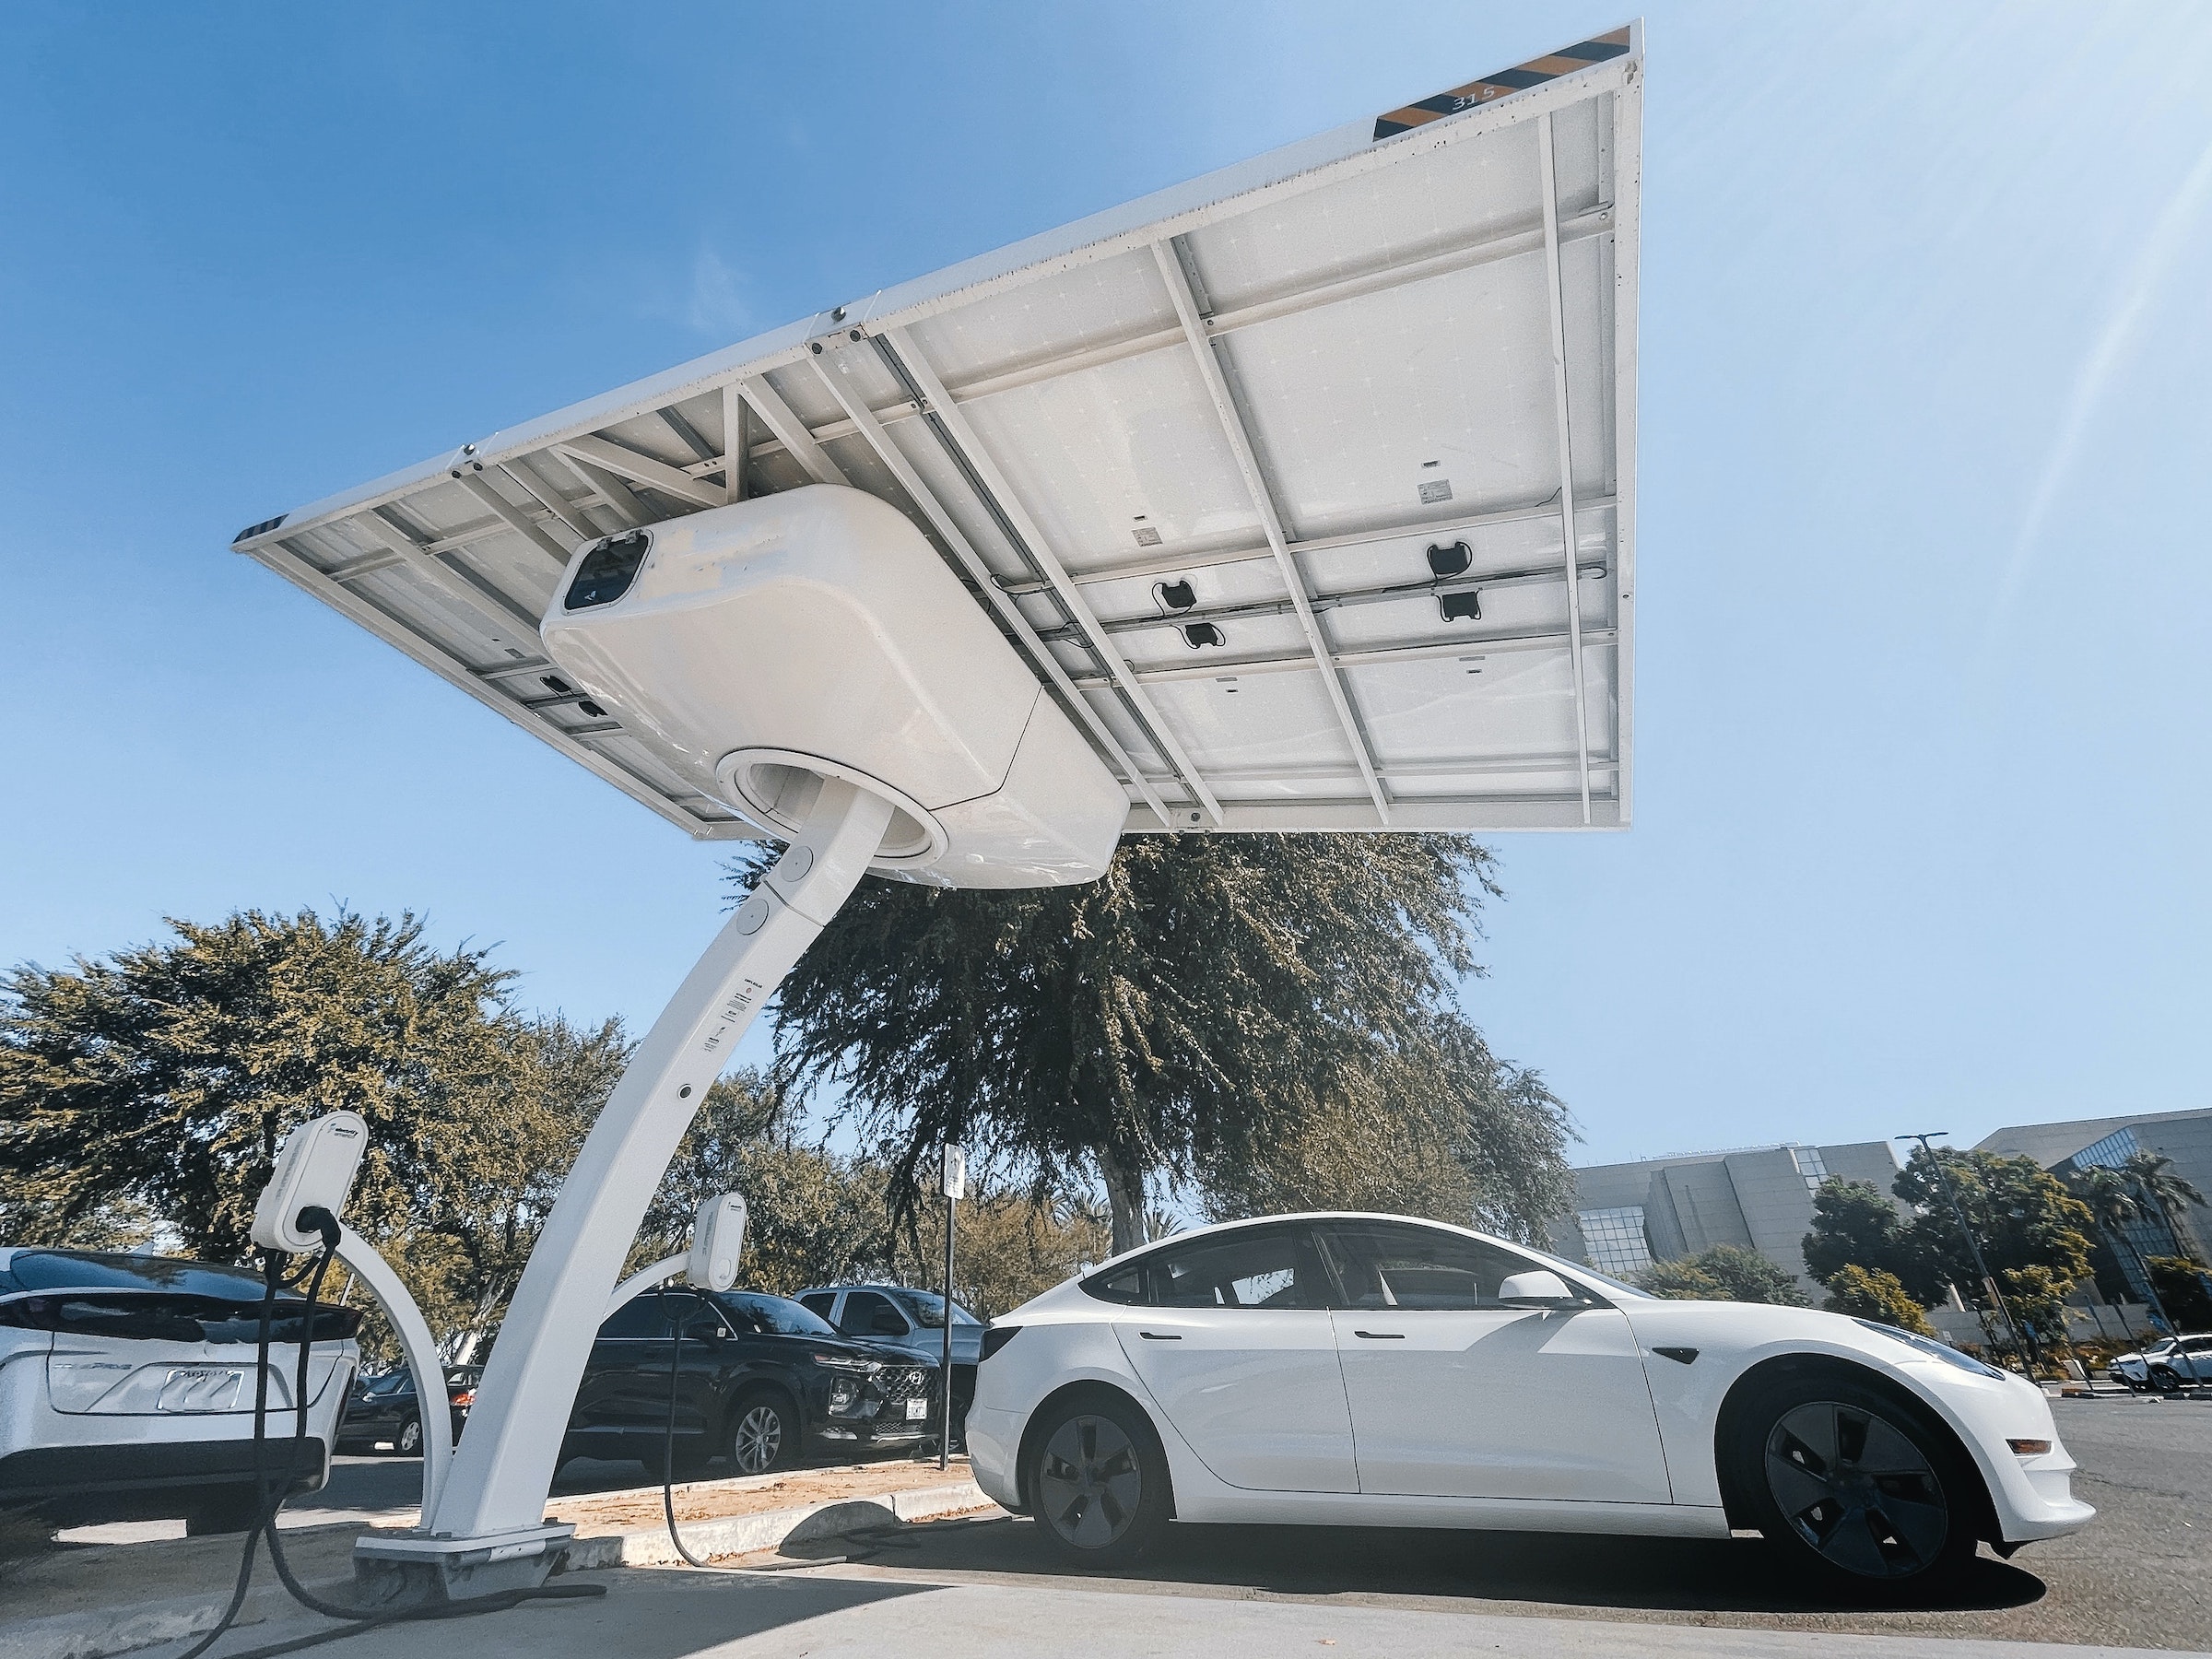 Electric vehicle charging stations rank third for top 10 convenience services at multifamily housing developments